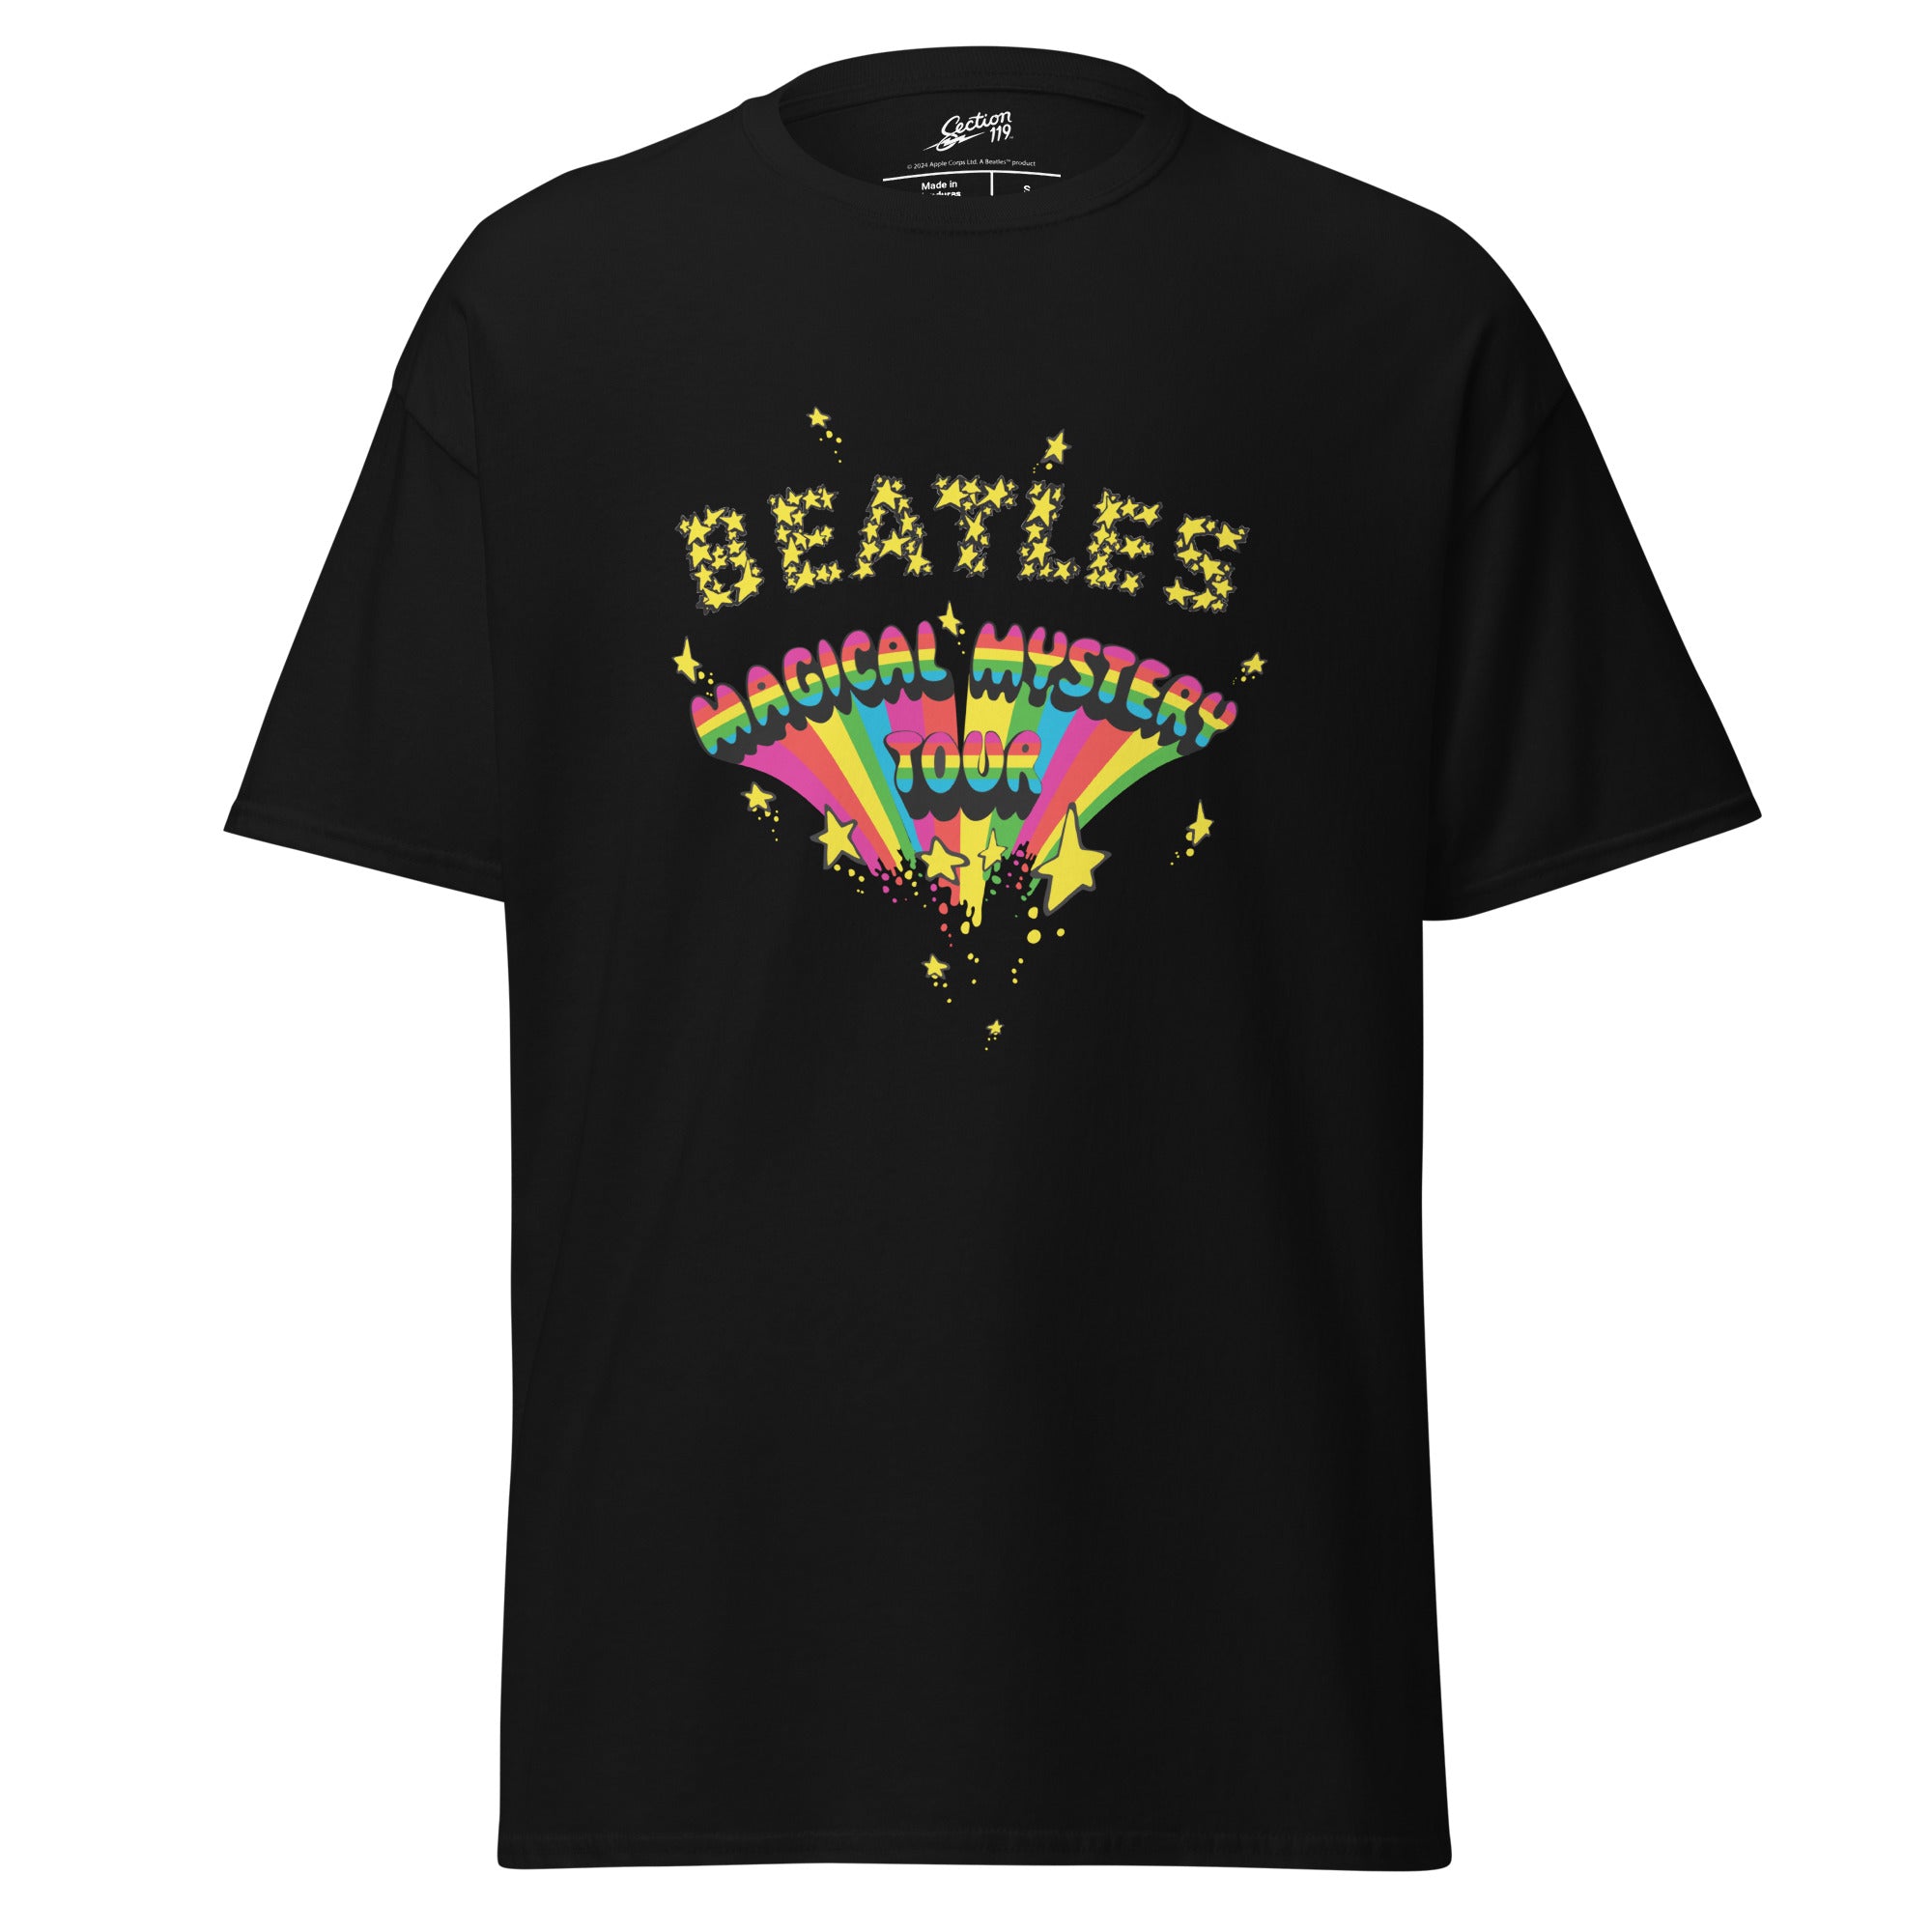 The Beatles Eco T-Shirt Magical Mystery Tour in Black - Section 119